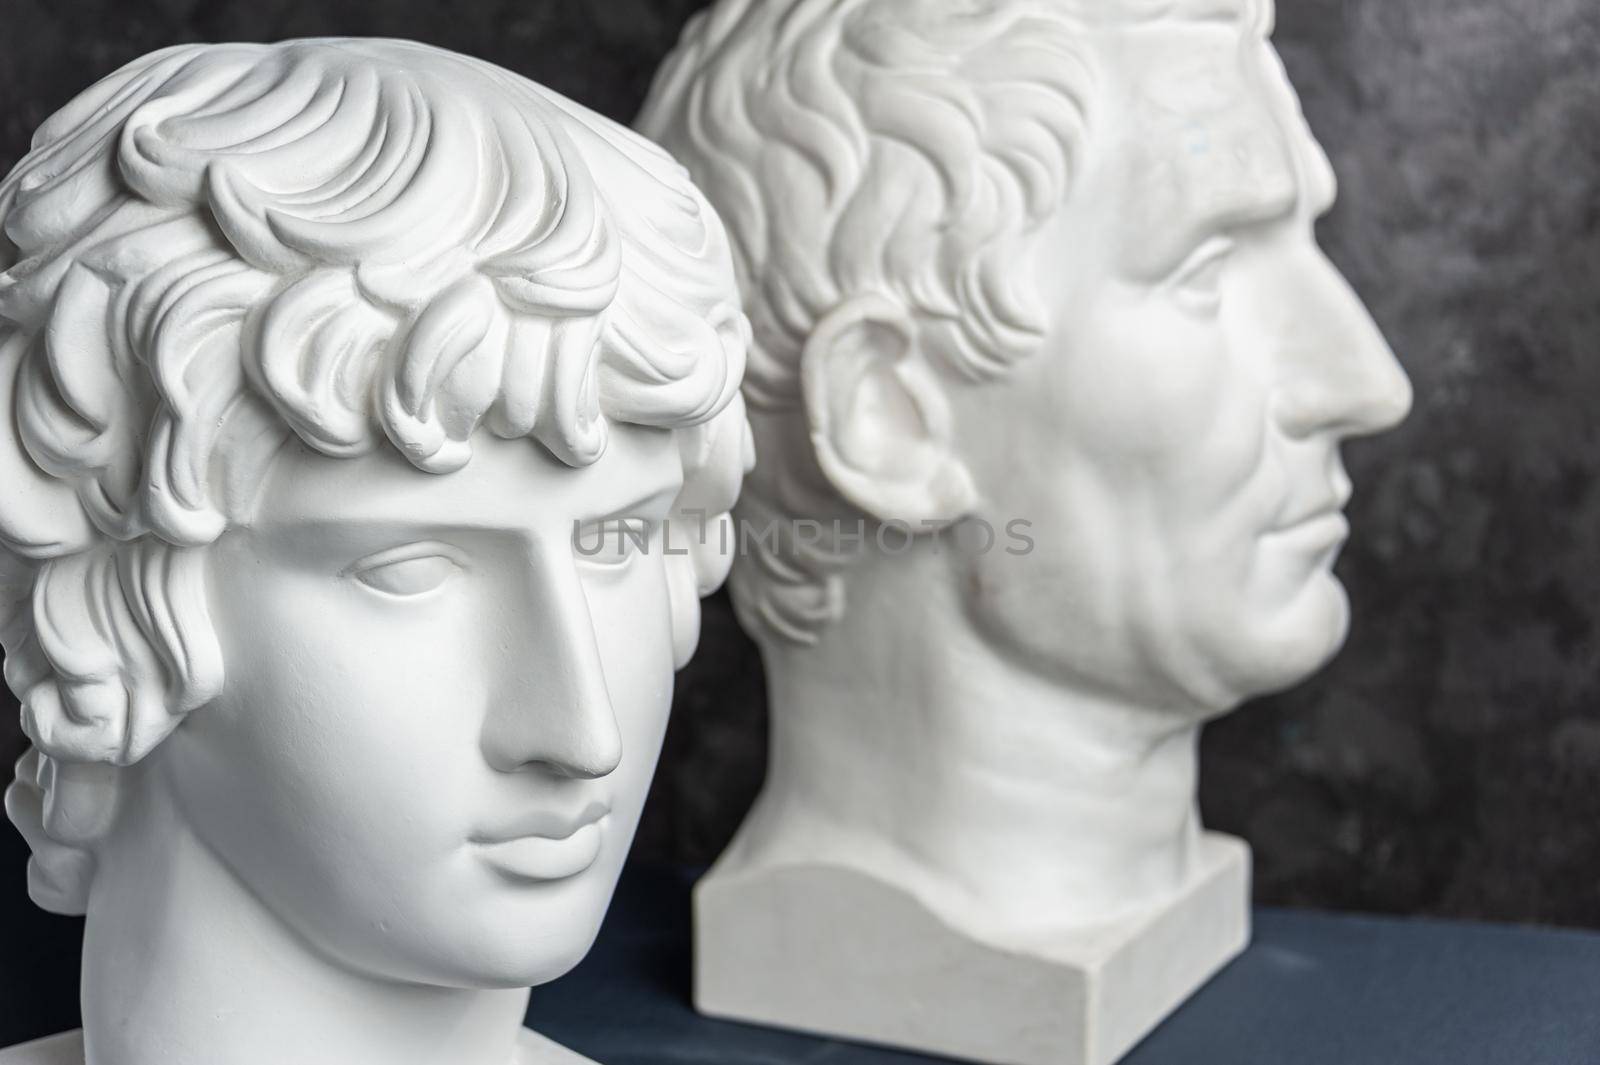 Group gypsum busts of ancient statues human heads for artists on a dark background. Plaster sculptures of antique people faces. Renaissance epoch style. Blank for creativity. Academic subject.